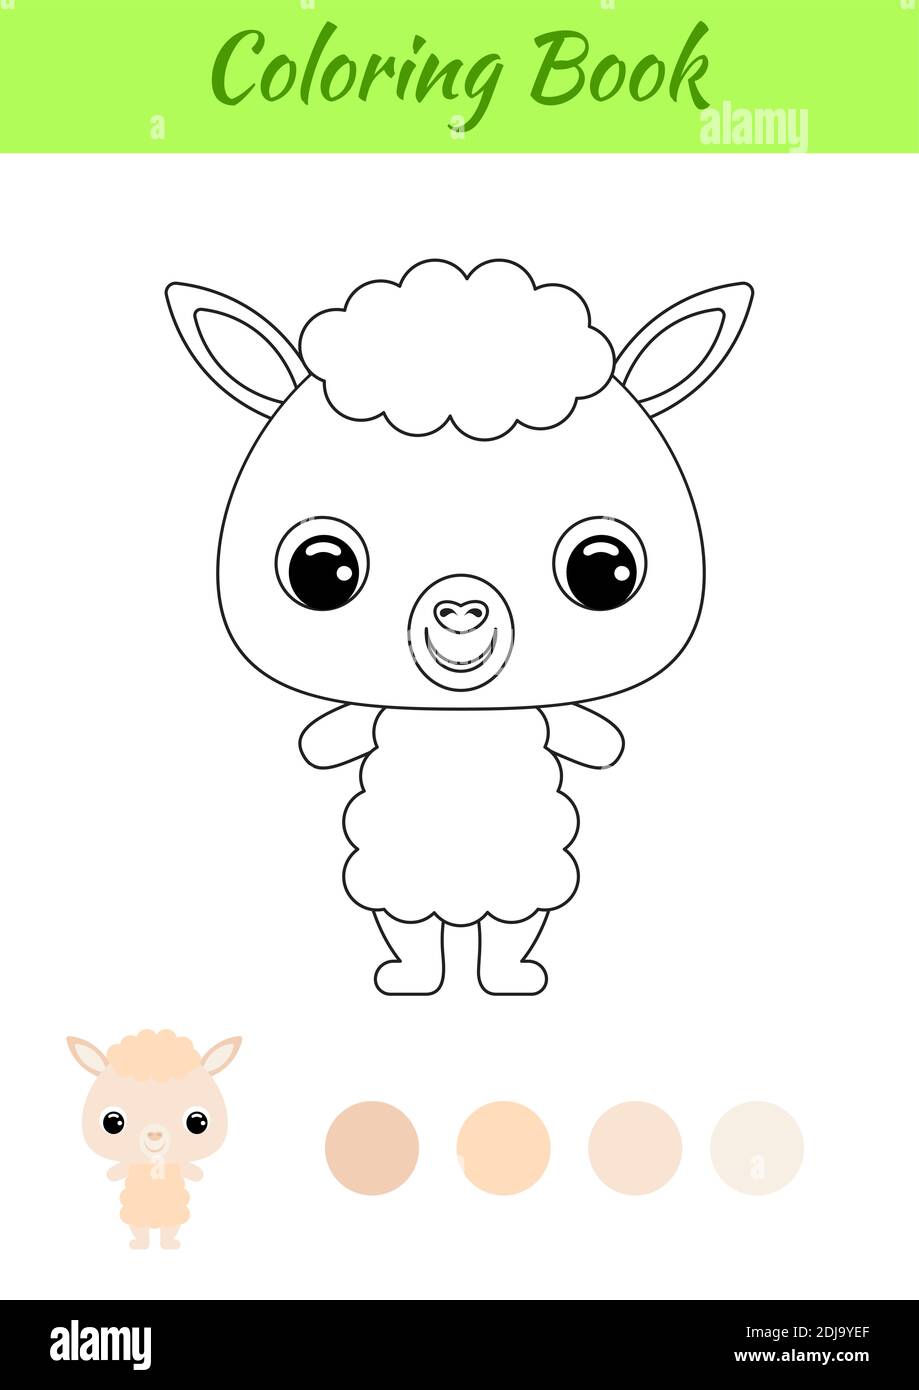 Coloring Book Little Baby Alpaca Coloring Page For Kids Educational Activity For Preschool Years Kids And Toddlers With Cute Animal Stock Vector Image Art Alamy